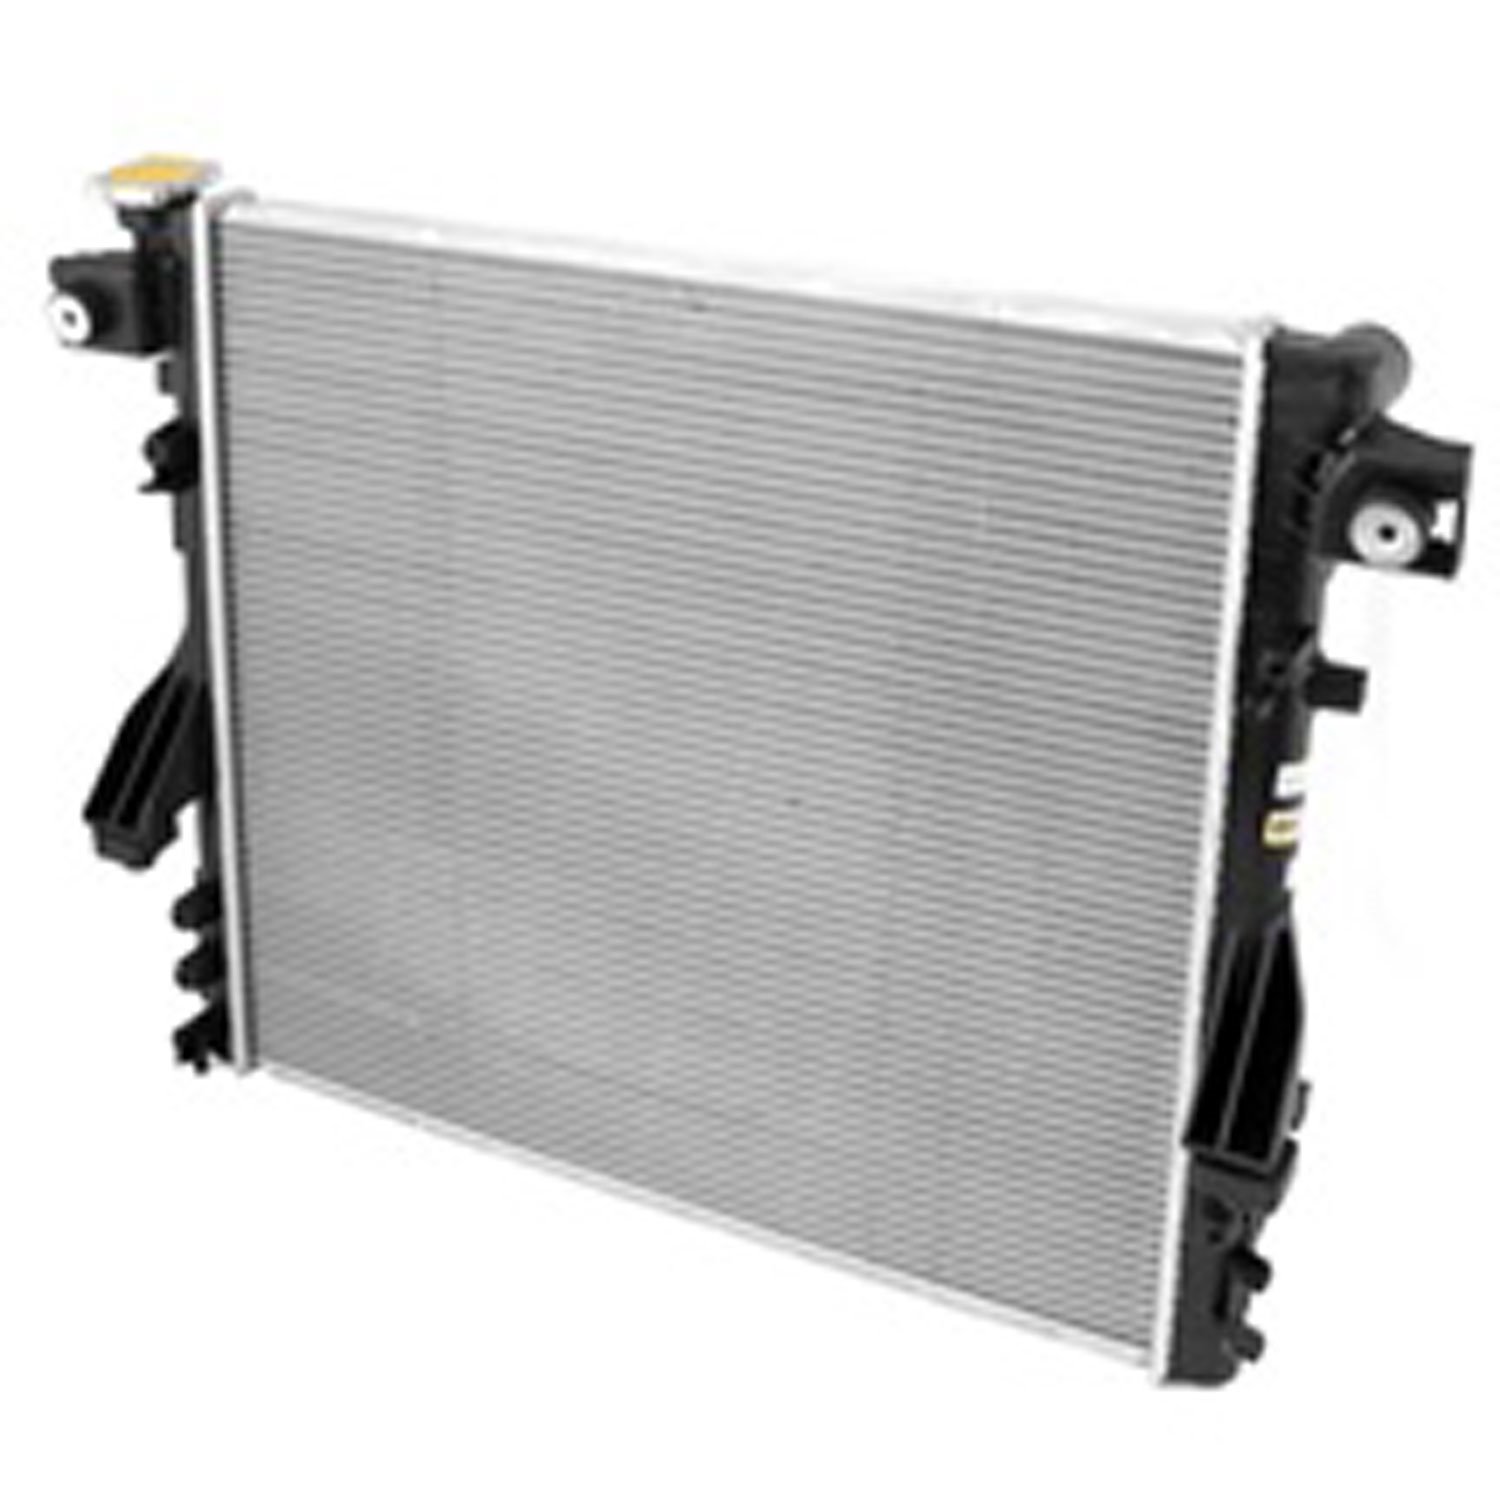 This 1 row radiator from Omix-ADA fits 07-16 Jeep Wranglers with a 3.6L or 3.8L engine.